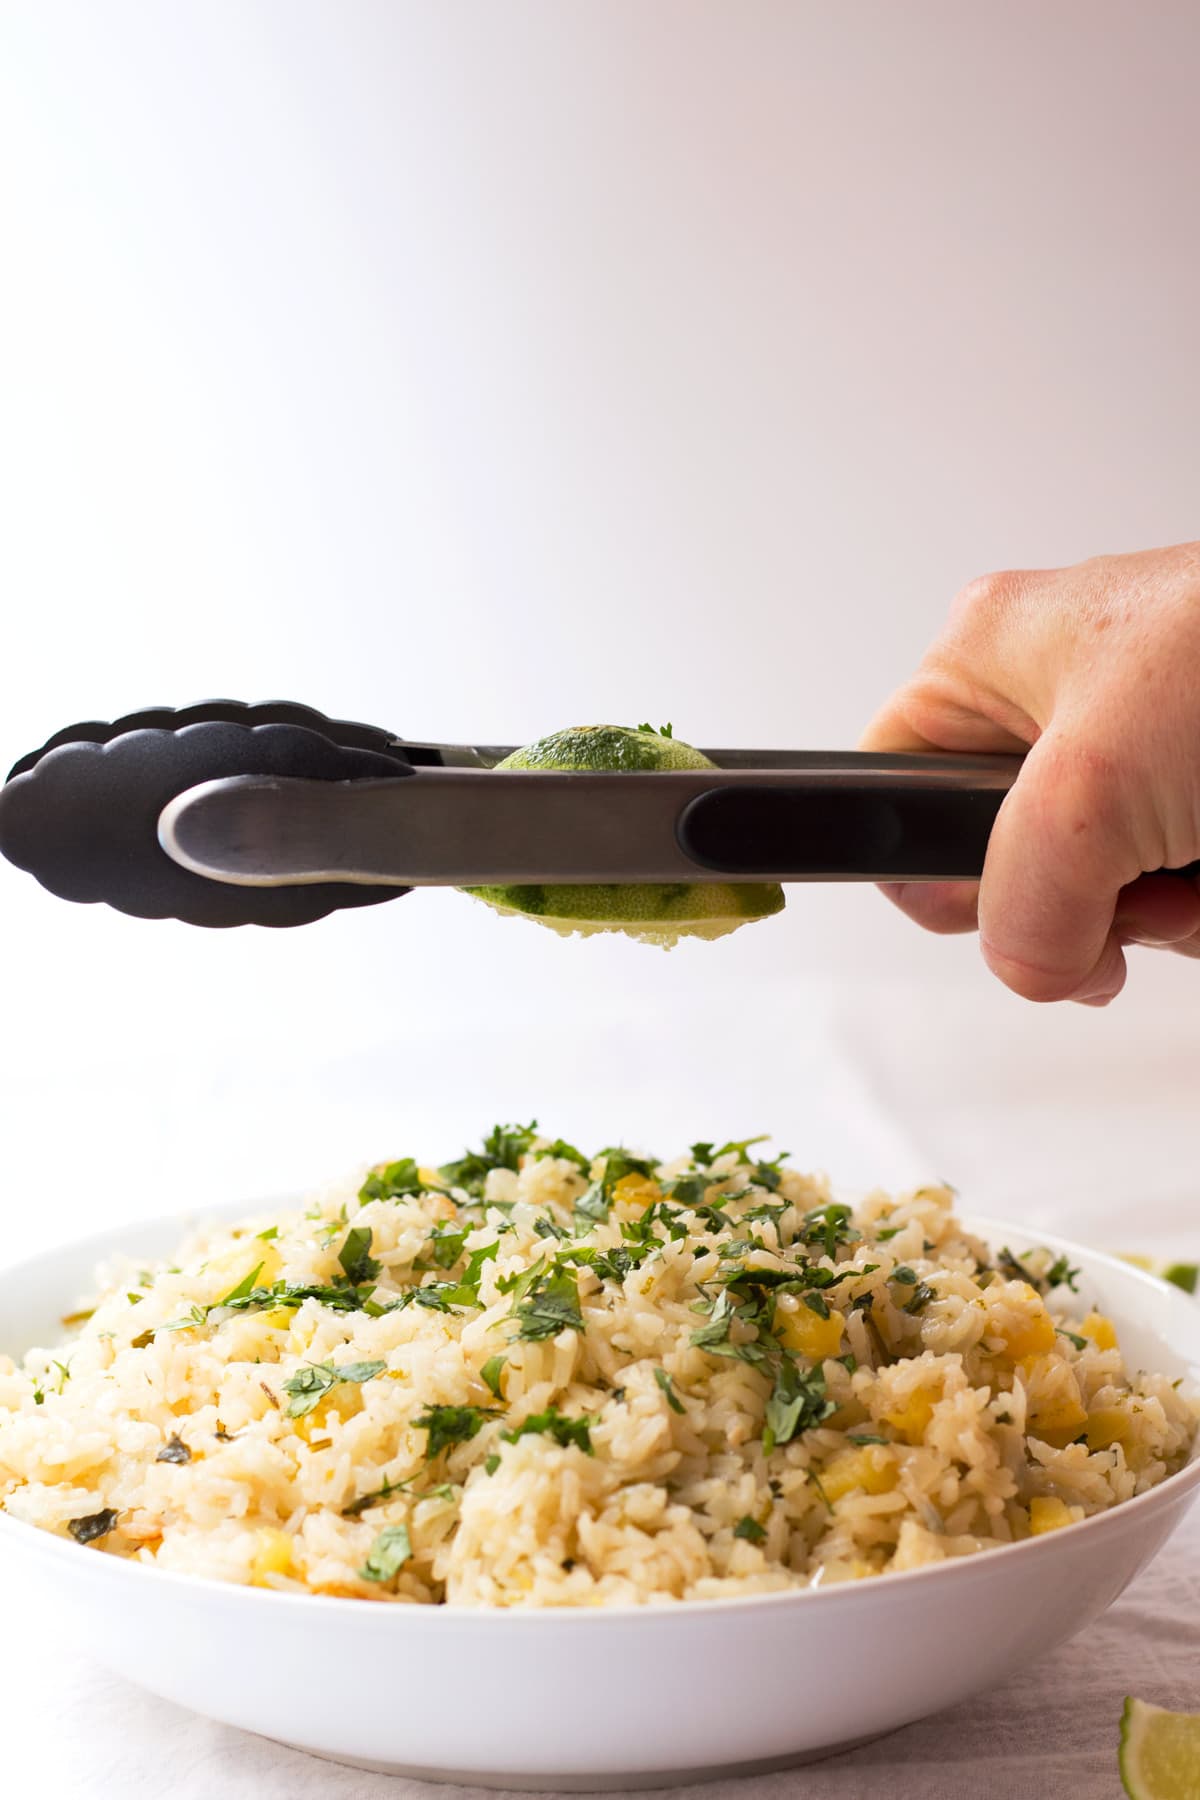 Hand squeezing a lime with tongs over a bowl of pineapple lime rice.